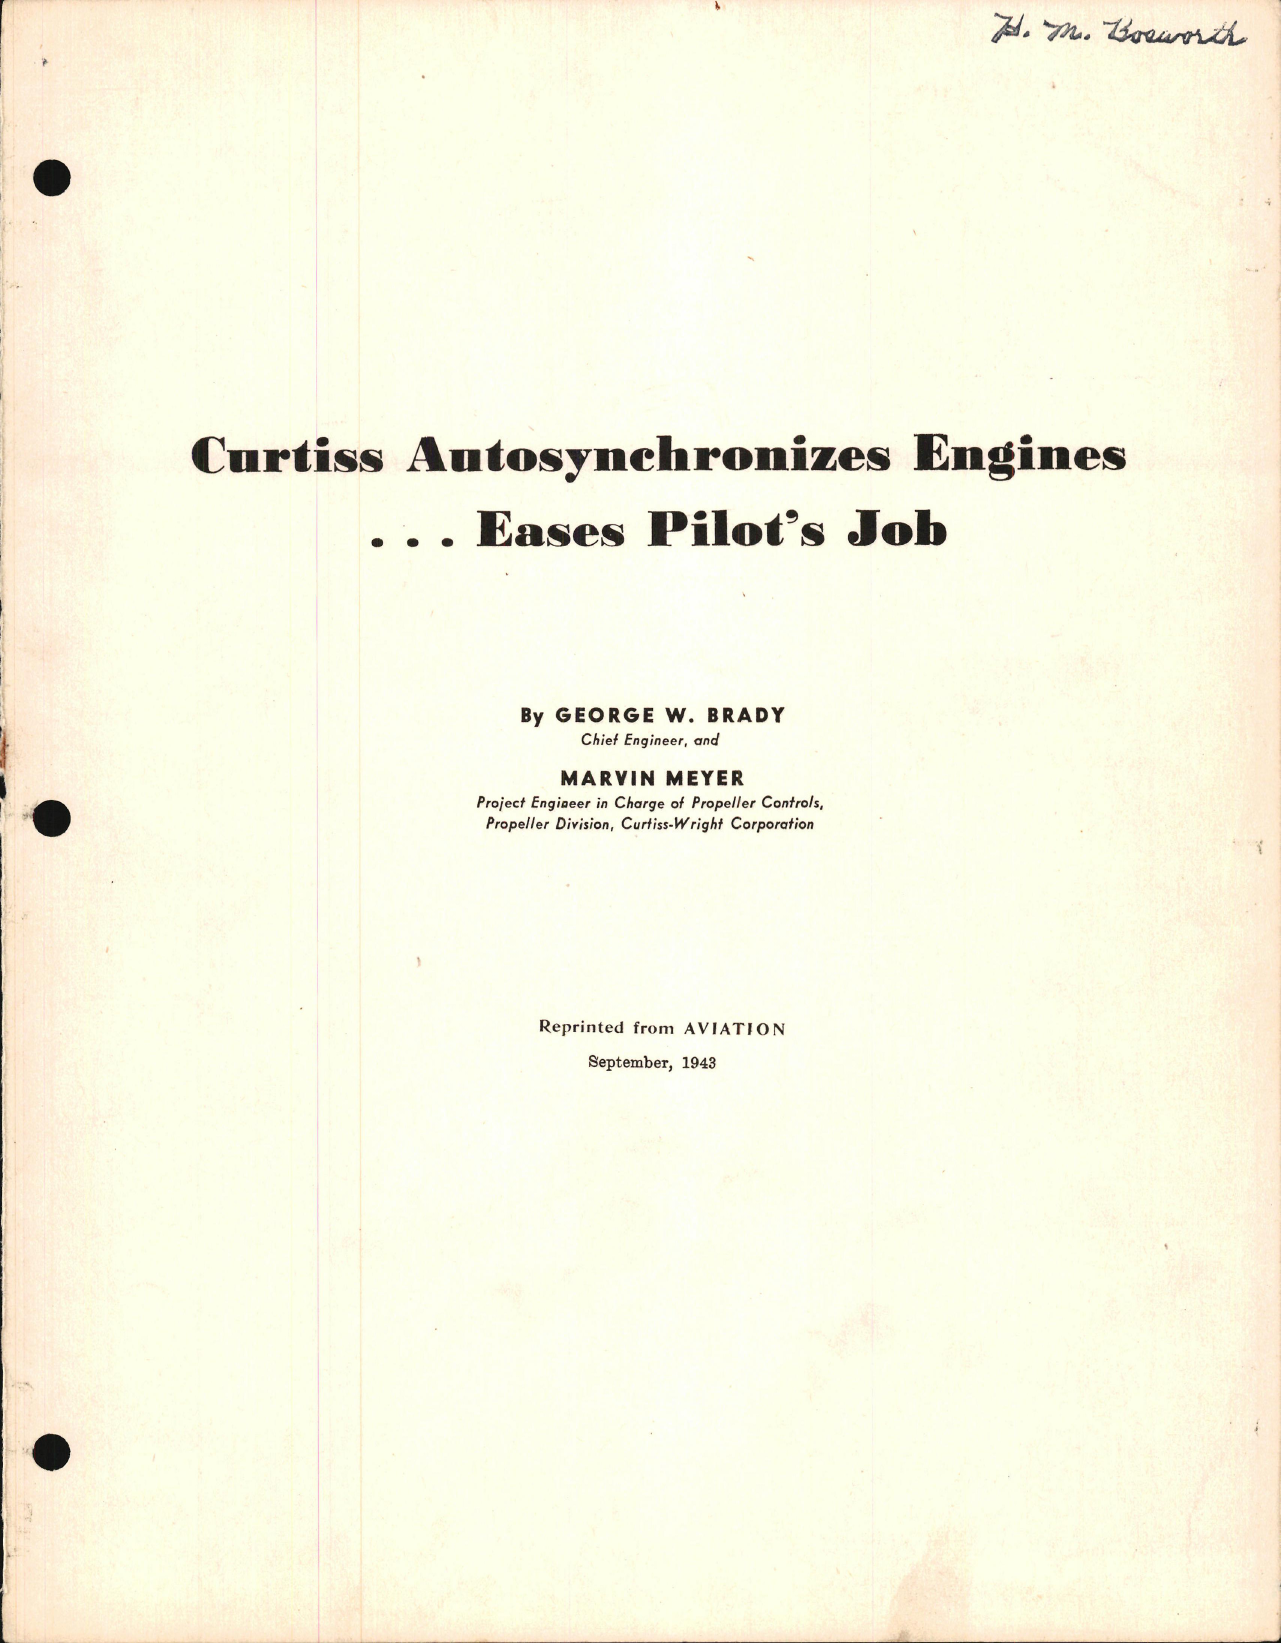 Sample page 1 from AirCorps Library document: Curtiss Autosynchronizes Engines